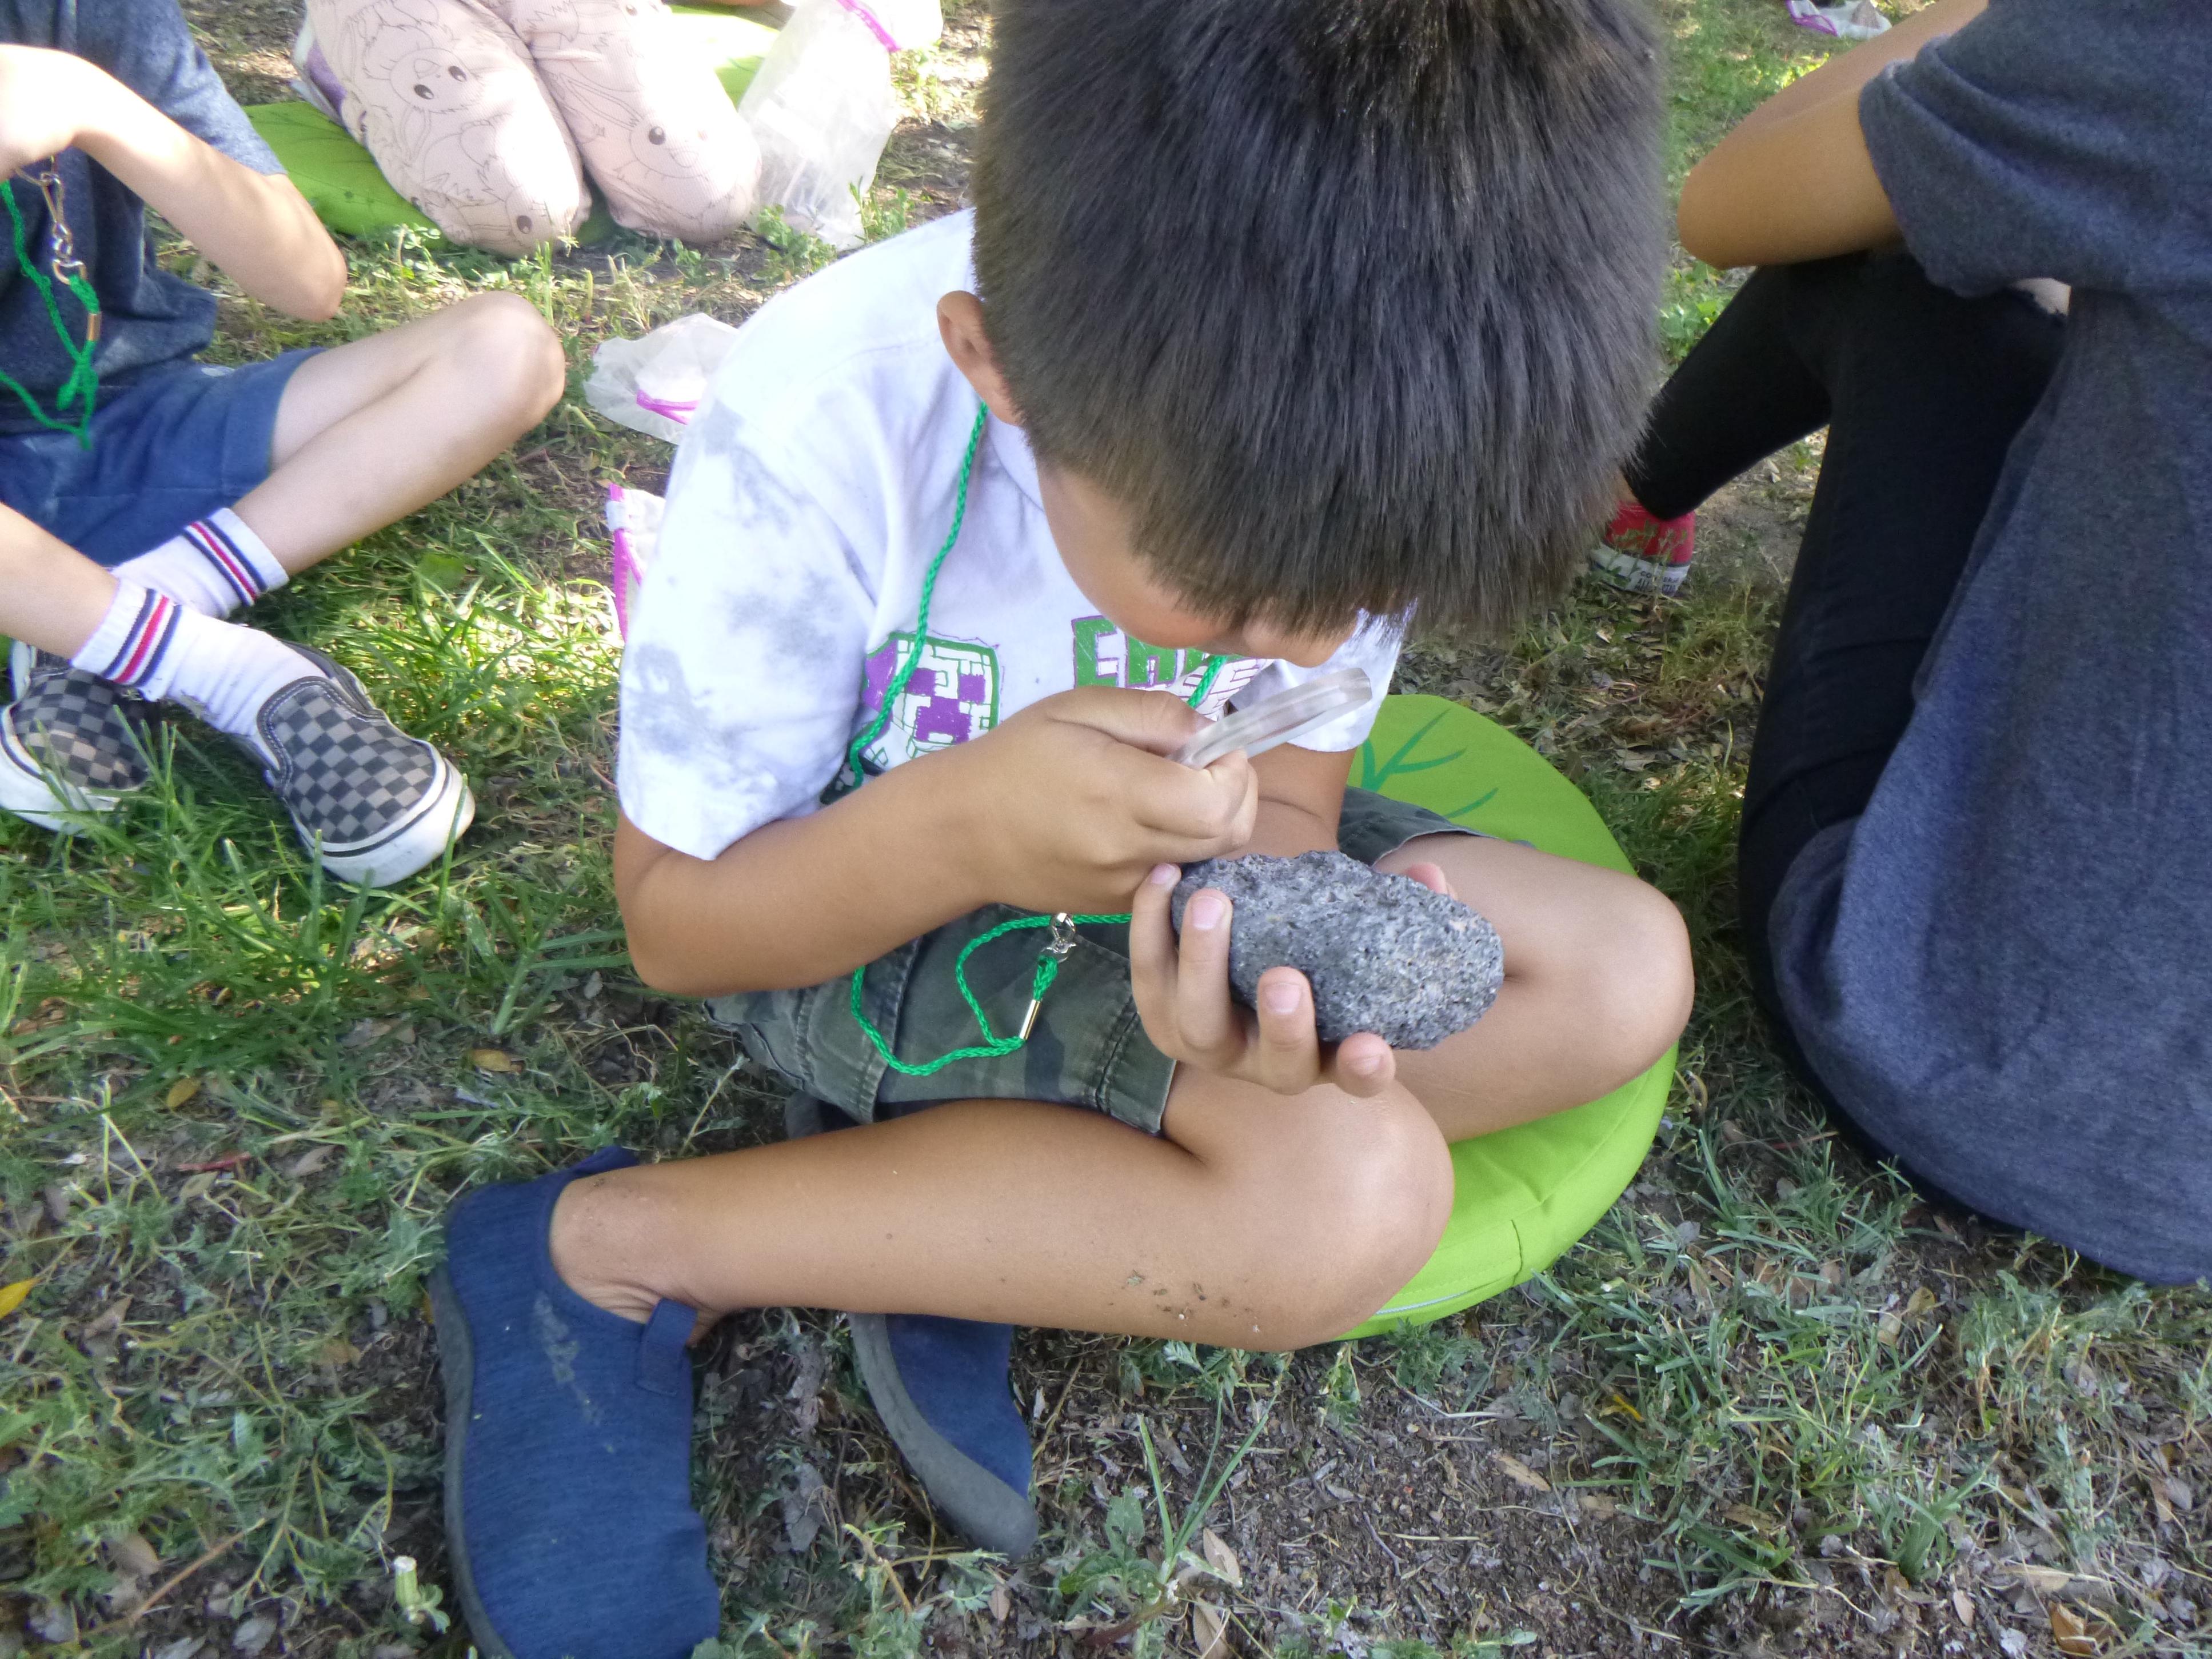 Image of a young student on a patch of grass wearing summer attire, holding a rock on one hand and observing it closely with a magnifying glass on the other.